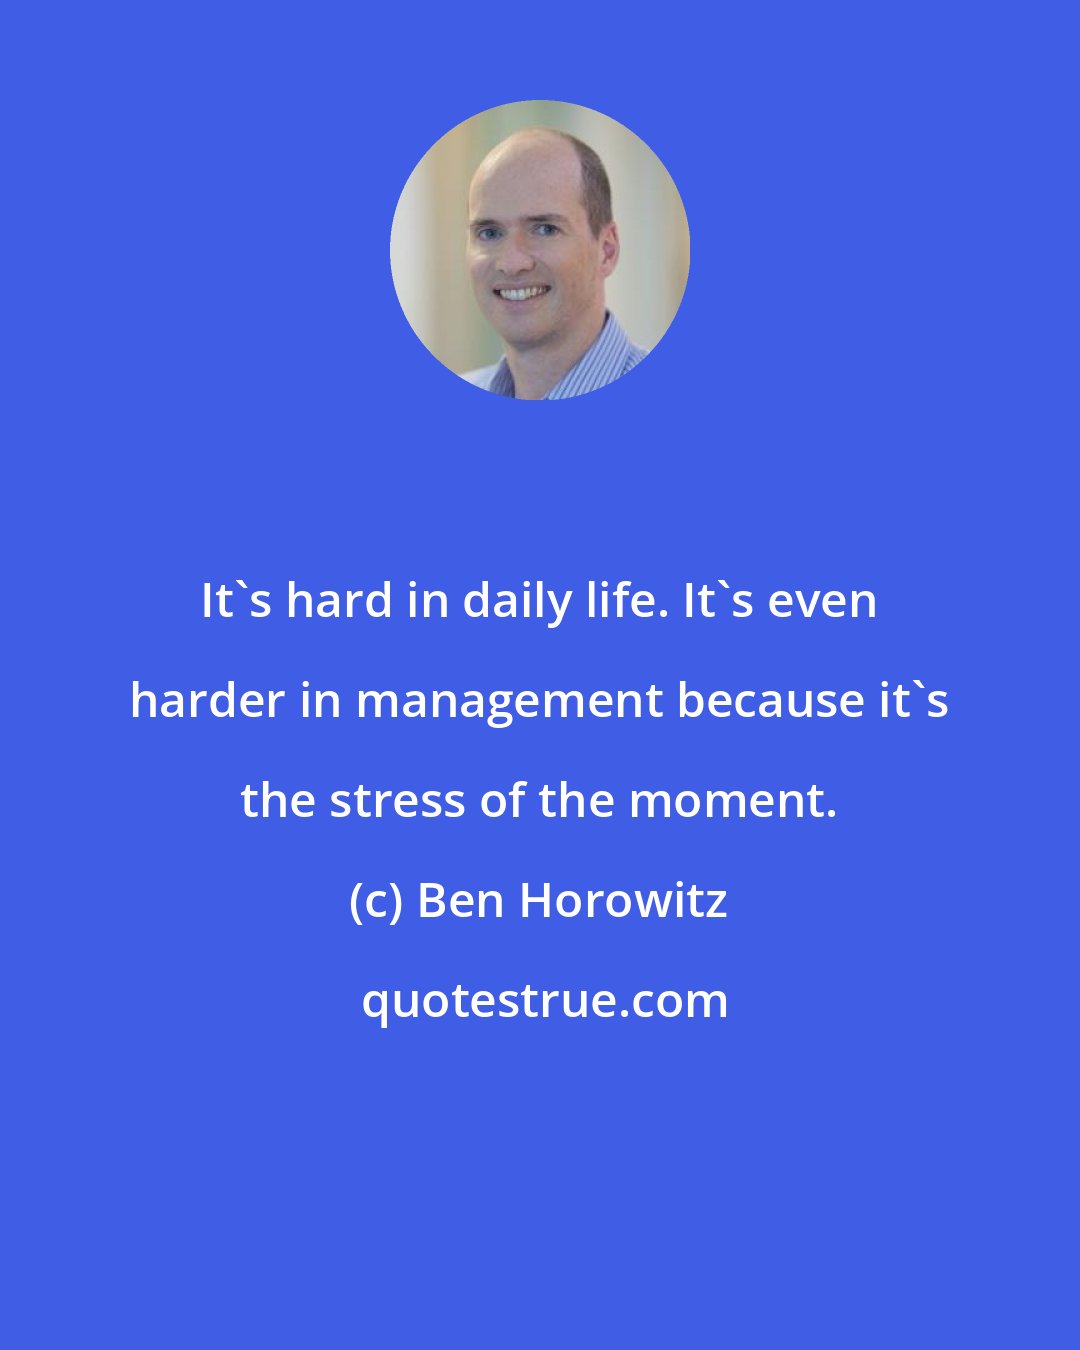 Ben Horowitz: It's hard in daily life. It's even harder in management because it's the stress of the moment.